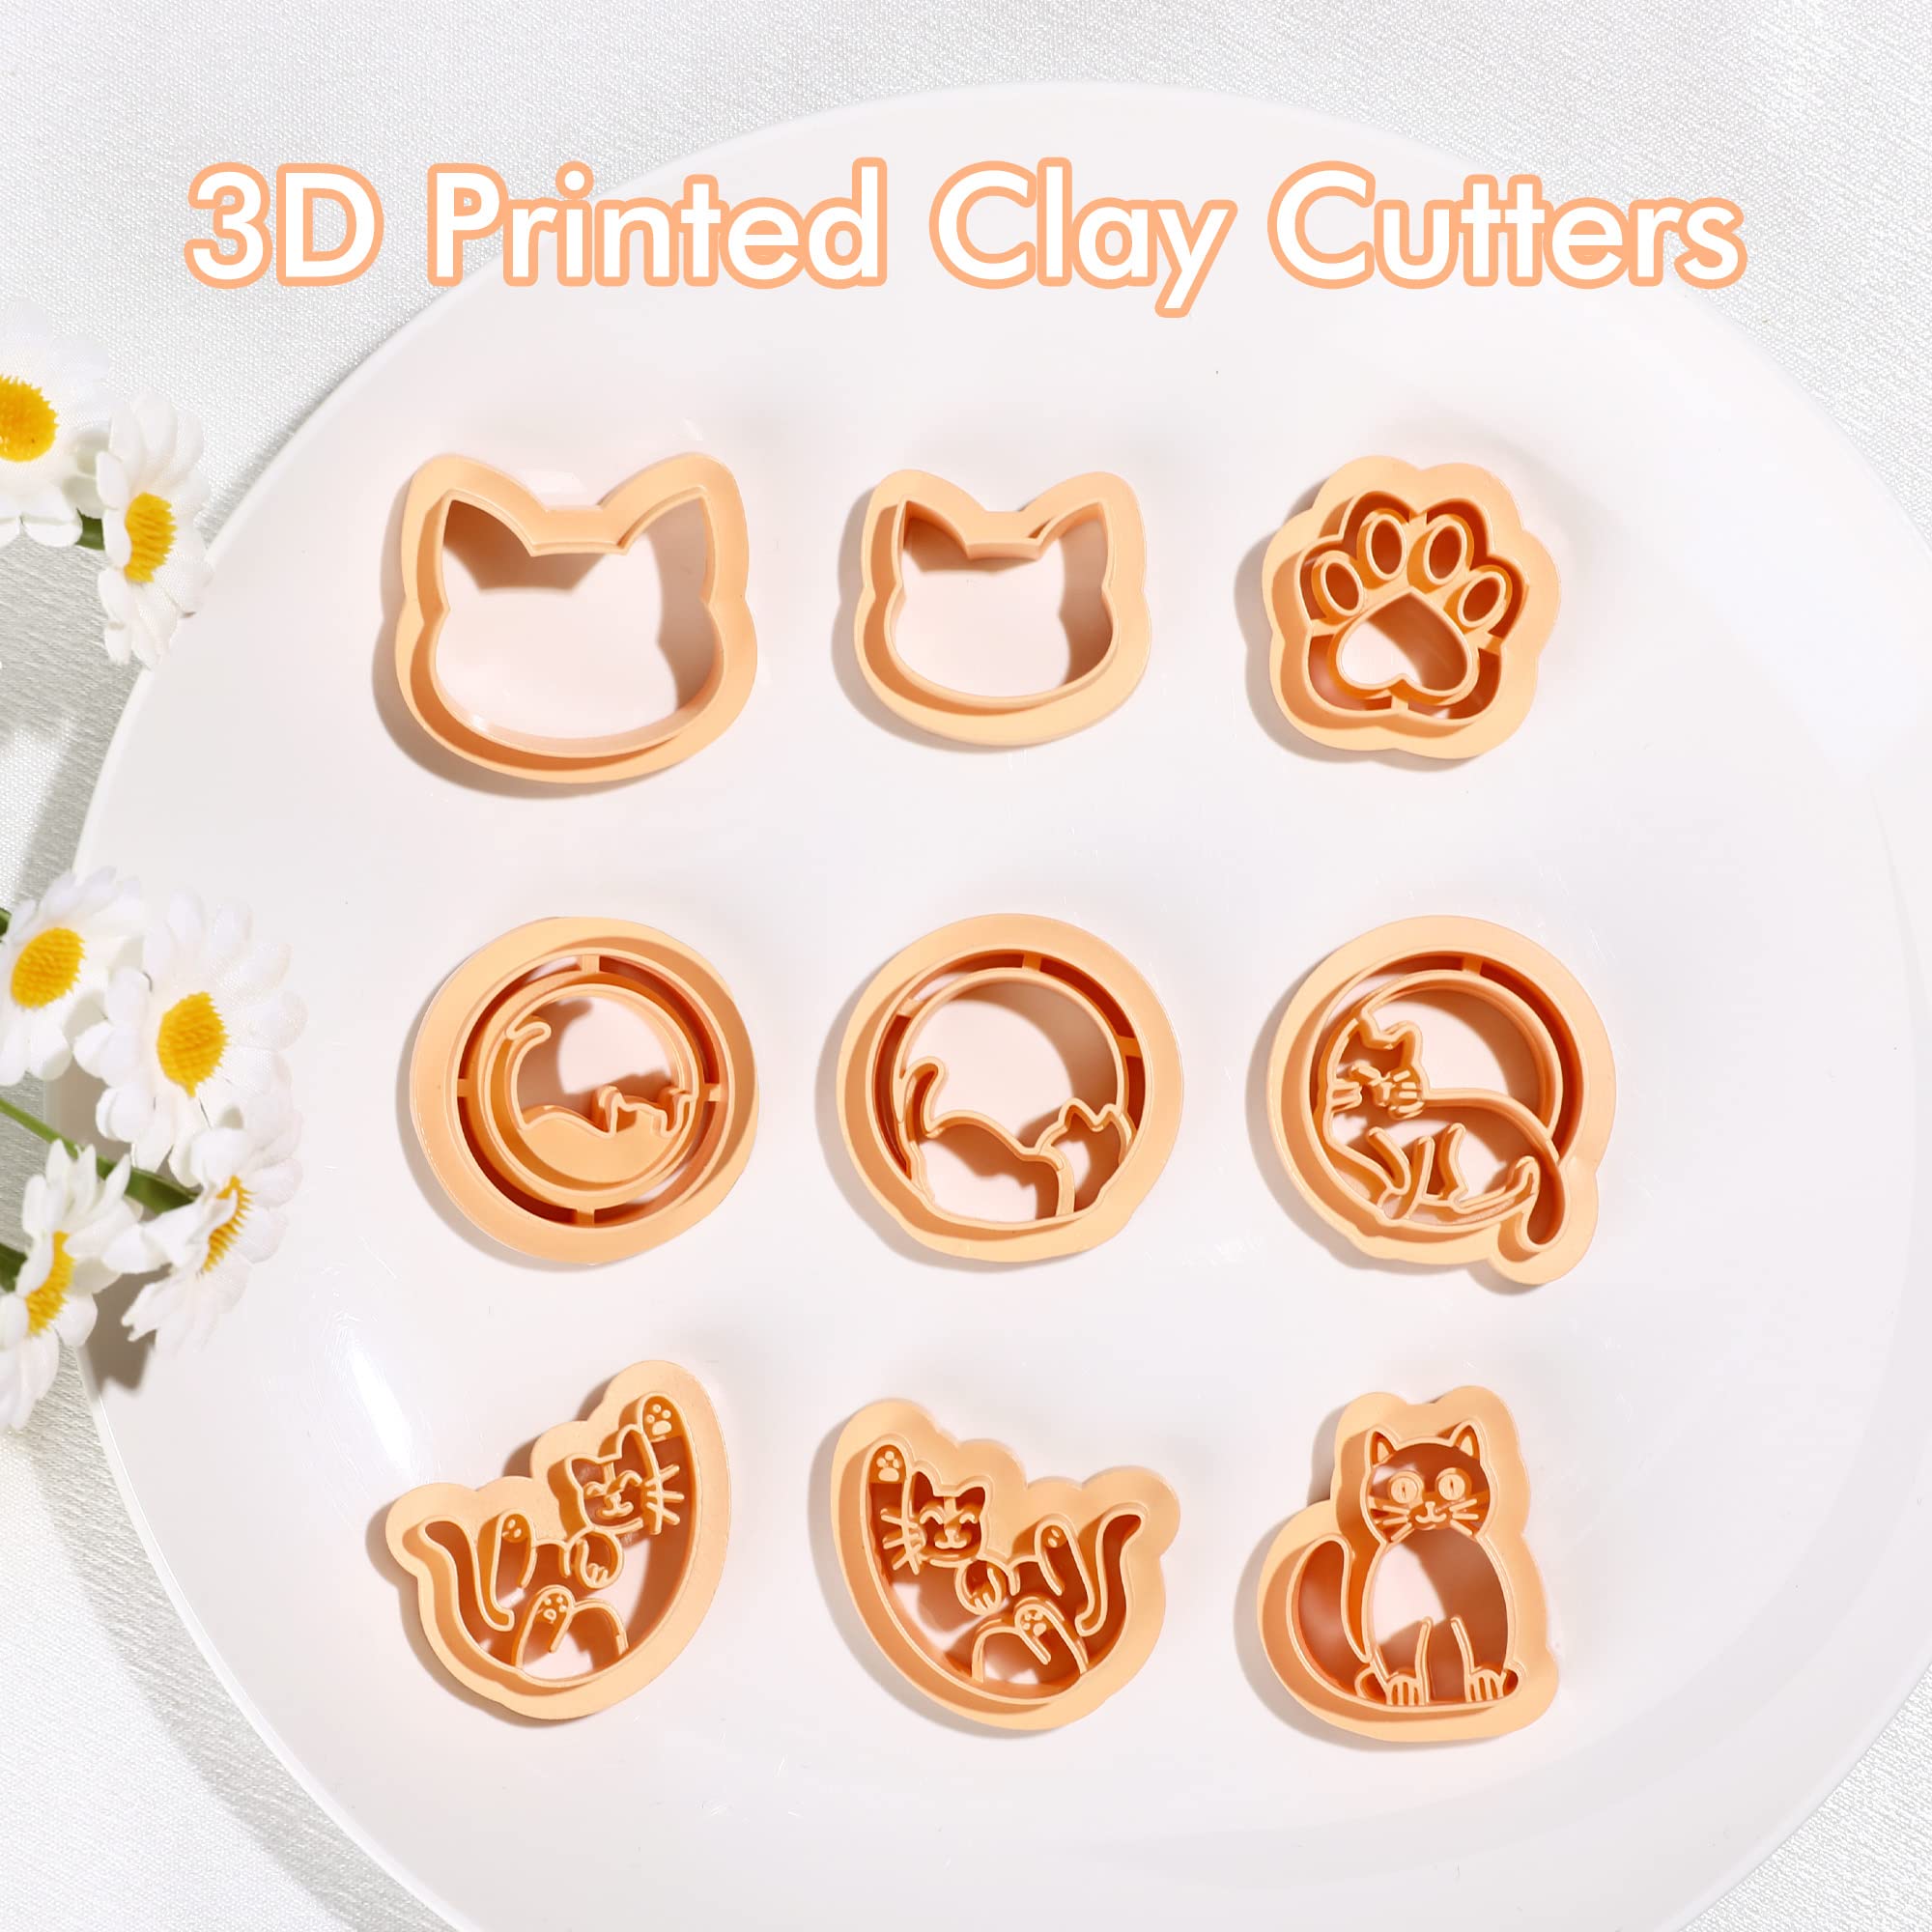 Puocaon Summer Lovin Clay Earring Cutters - 6 Shapes Clay Cutters